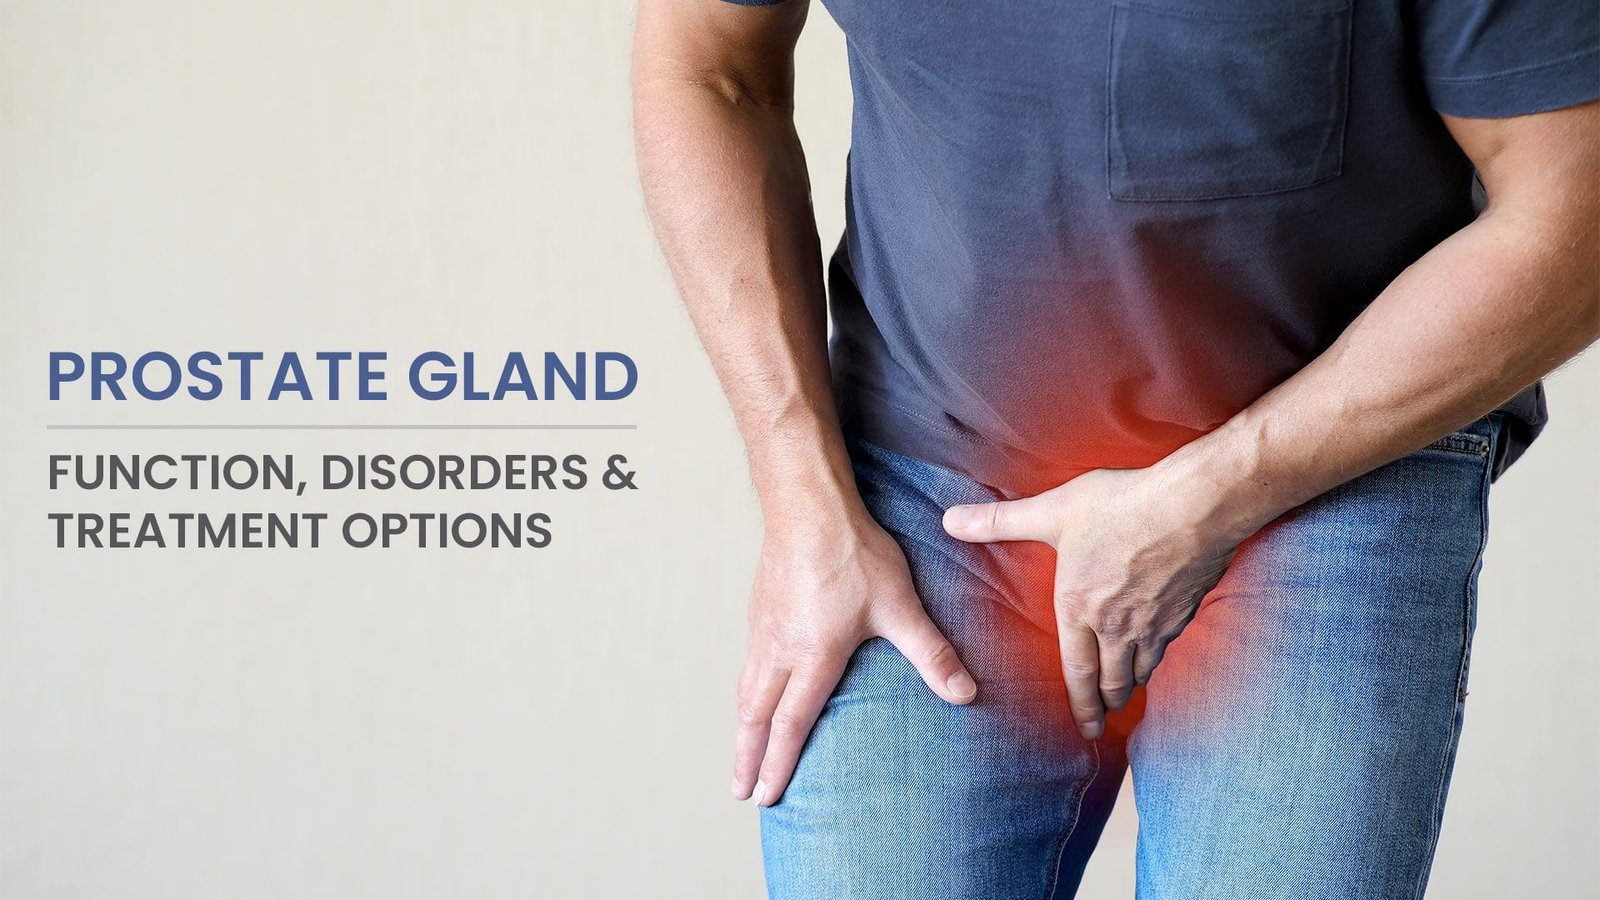 Prostate Gland: Function, Disorders and Treatment Options